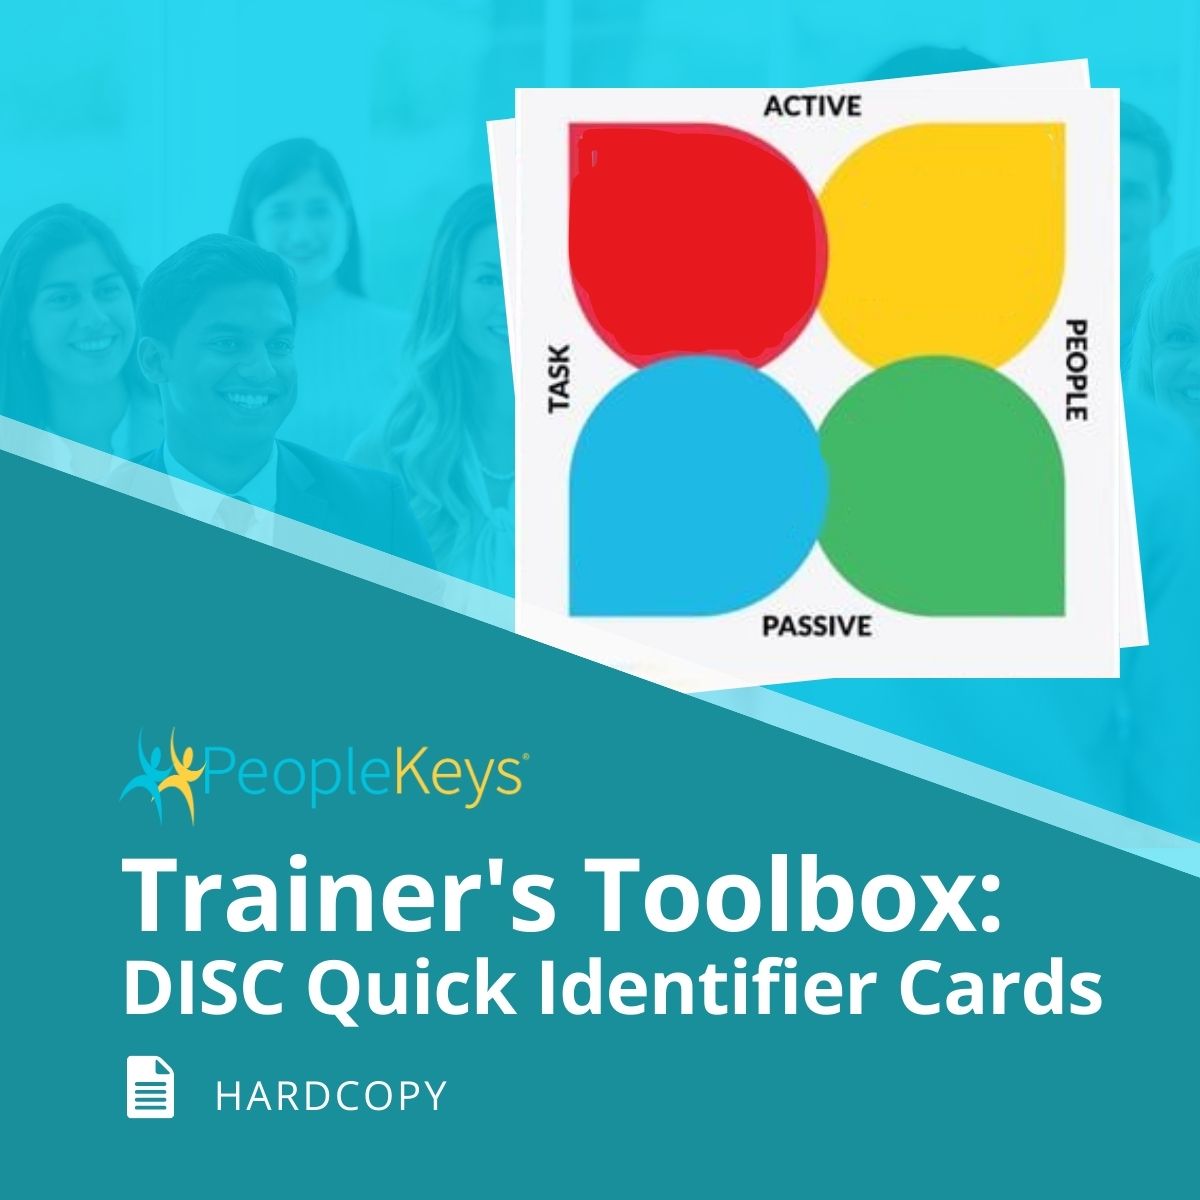 Trainer's Toolbox: DISC Quick Identifier Cards - Pack of 10 (Hardcopy)